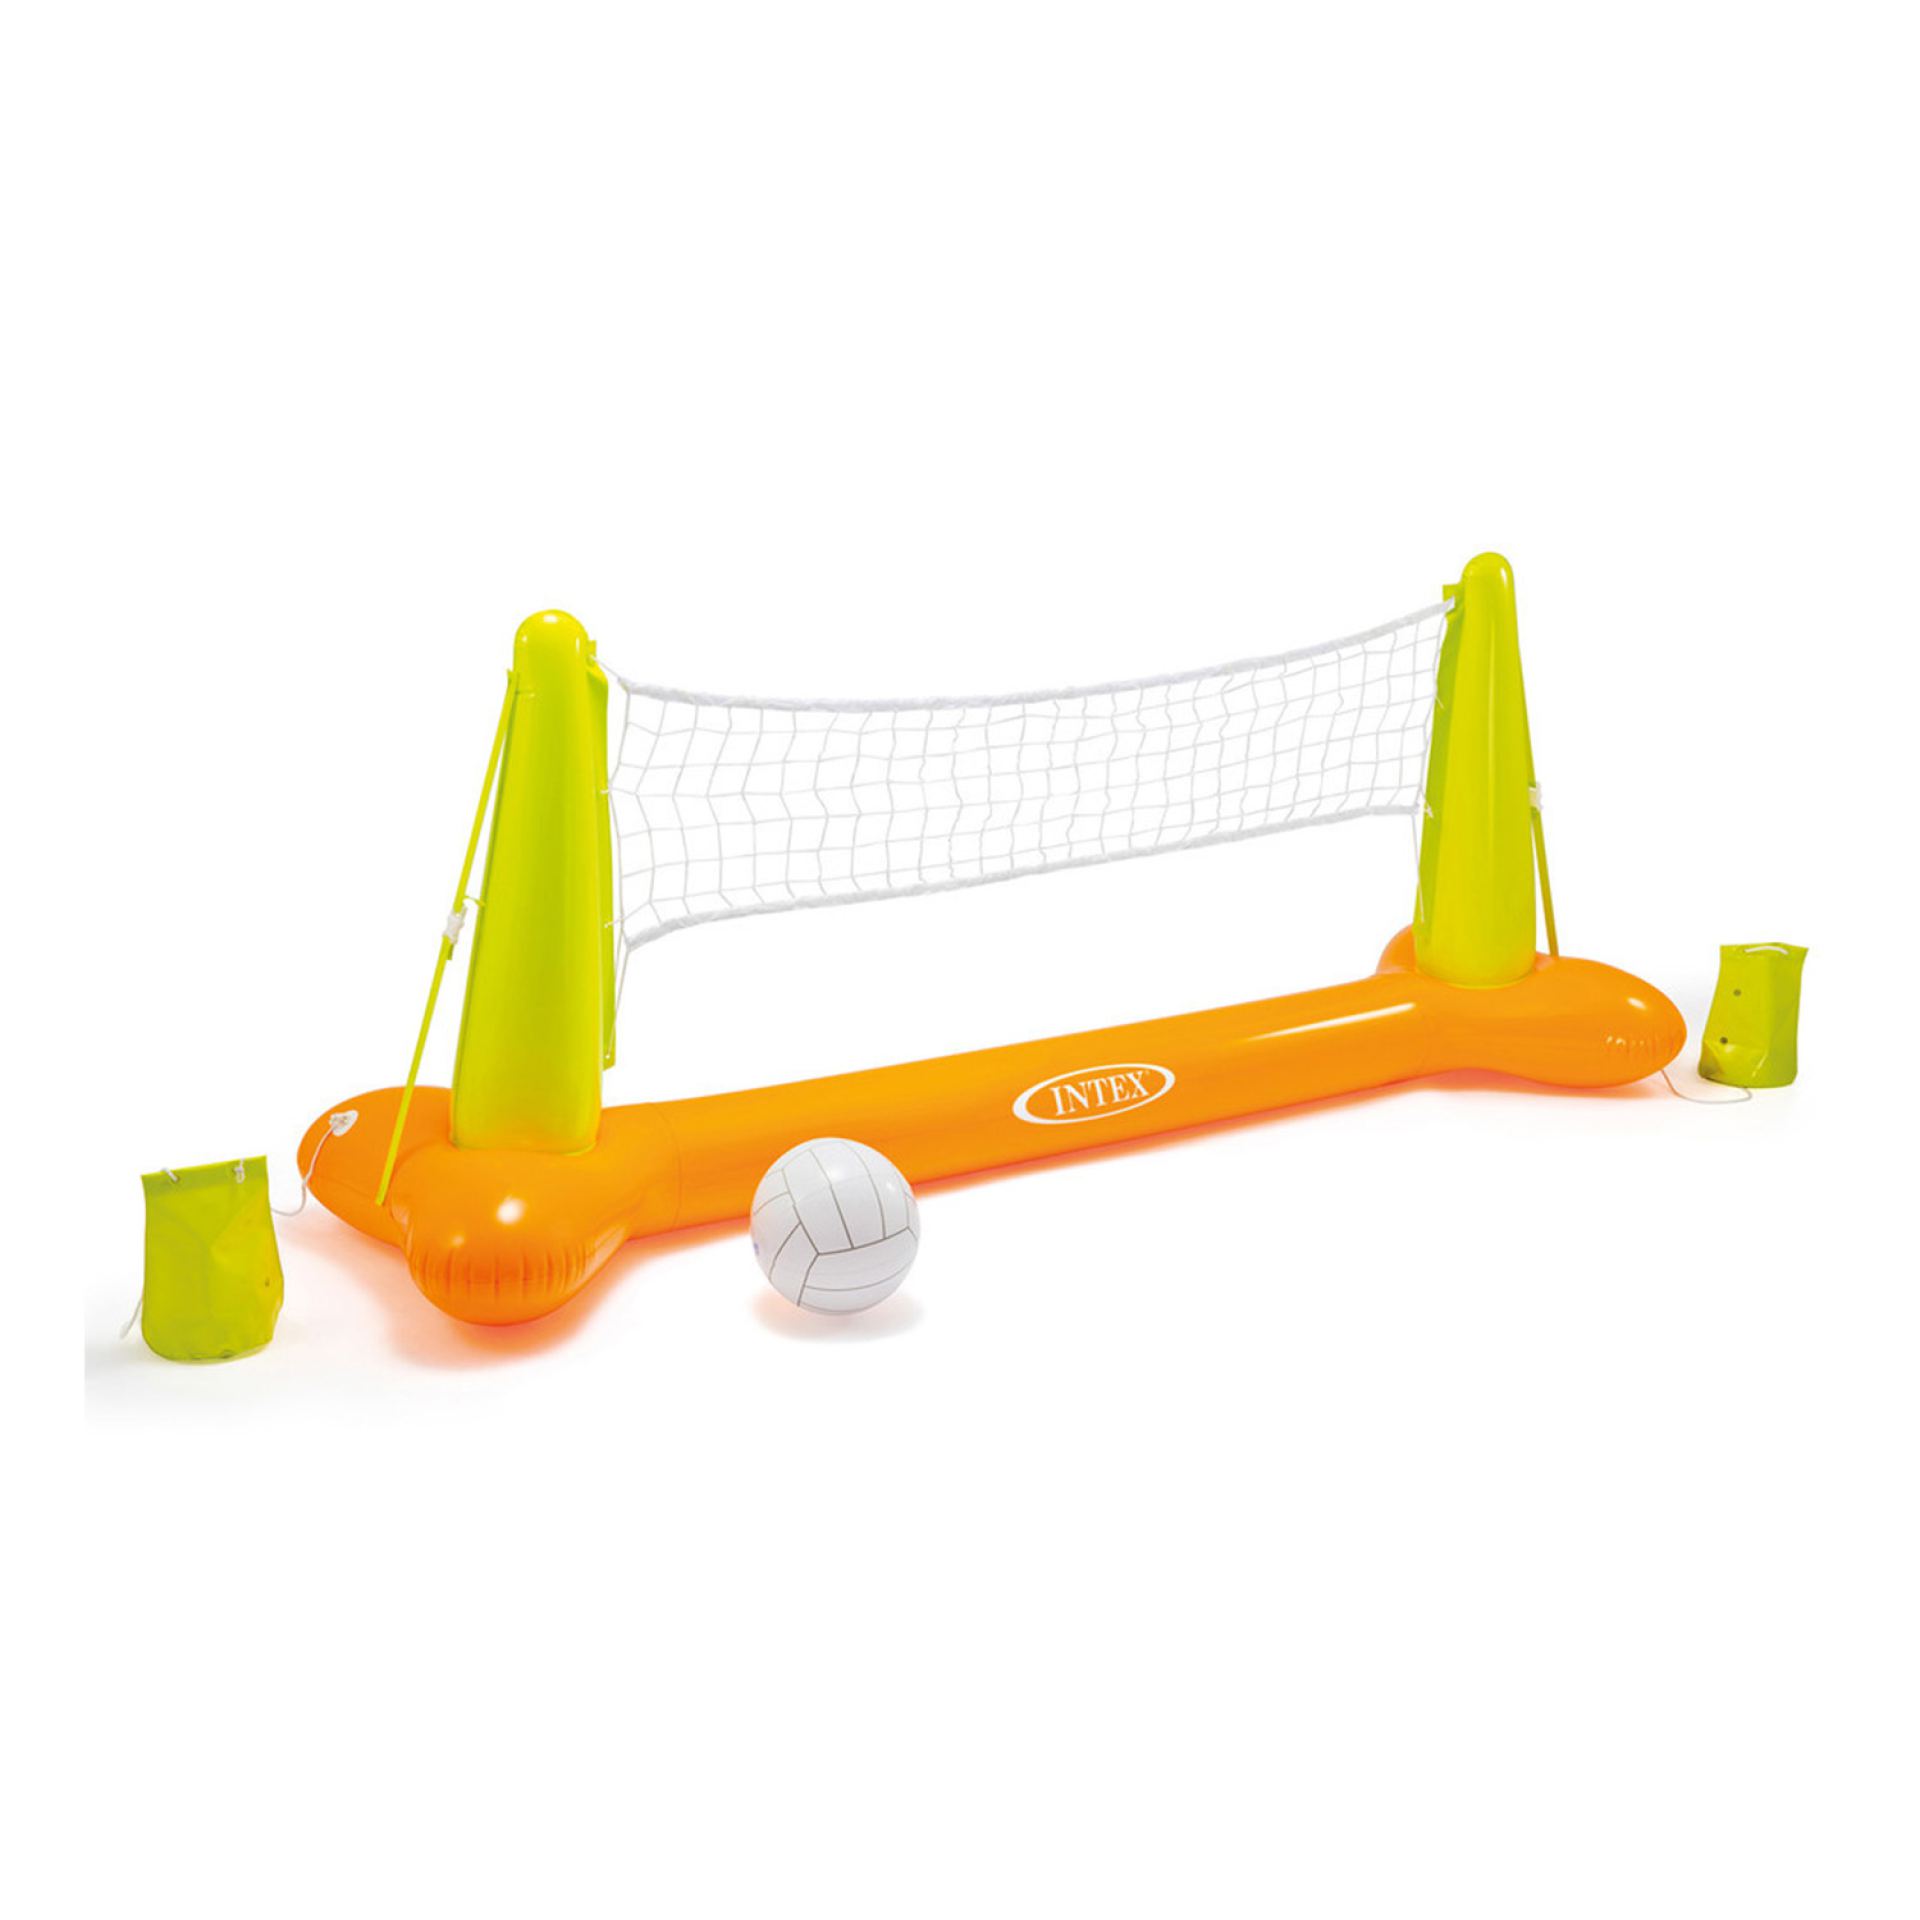 Intex inflatable pool volleyball net 238x63cm